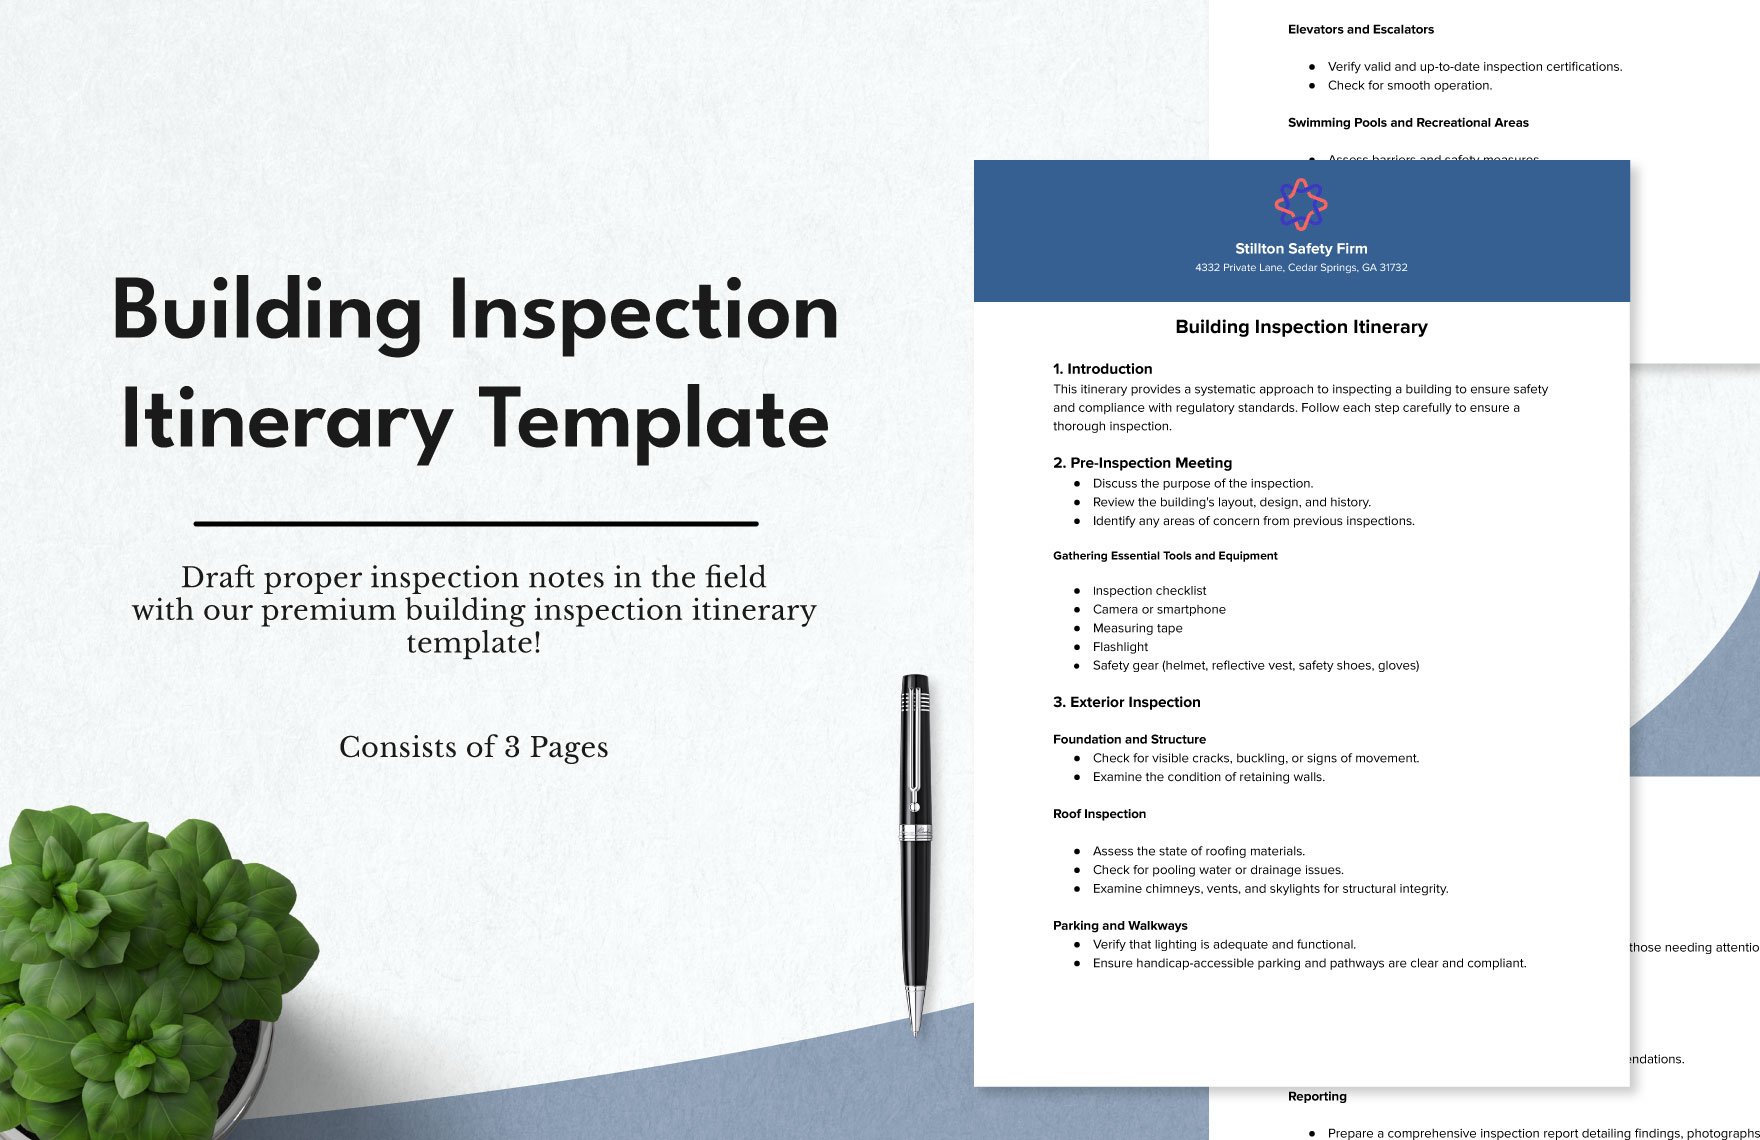 Building Inspection Itinerary Template